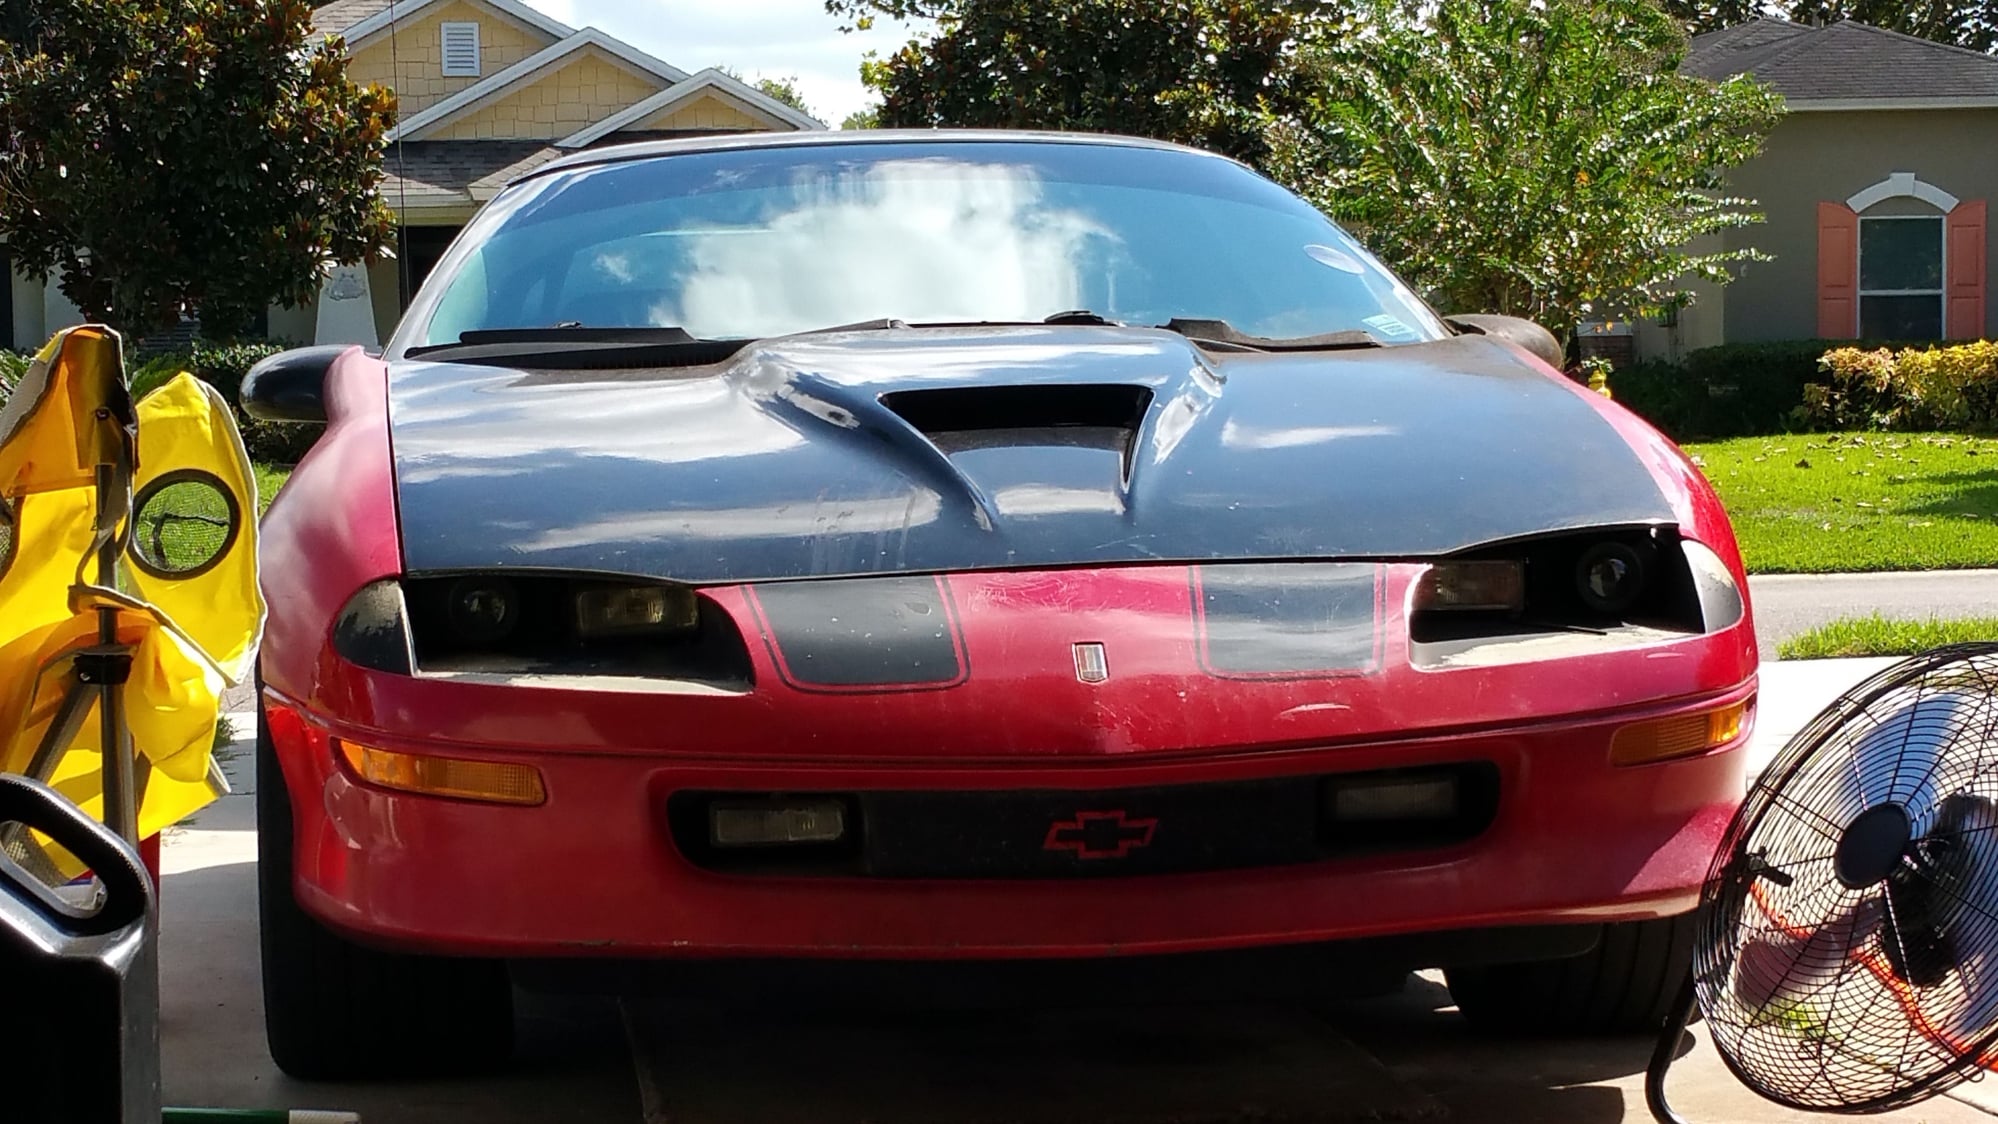 1997 Chevrolet Camaro - FS : 1997 Camaro Z28 - M6 - needs fixing - lots of bolt ons --- $2700 - Used - VIN 2G1FP22P3V2149125 - 120,516 Miles - 8 cyl - 2WD - Manual - Coupe - Red - St Augustine, FL 32092, United States